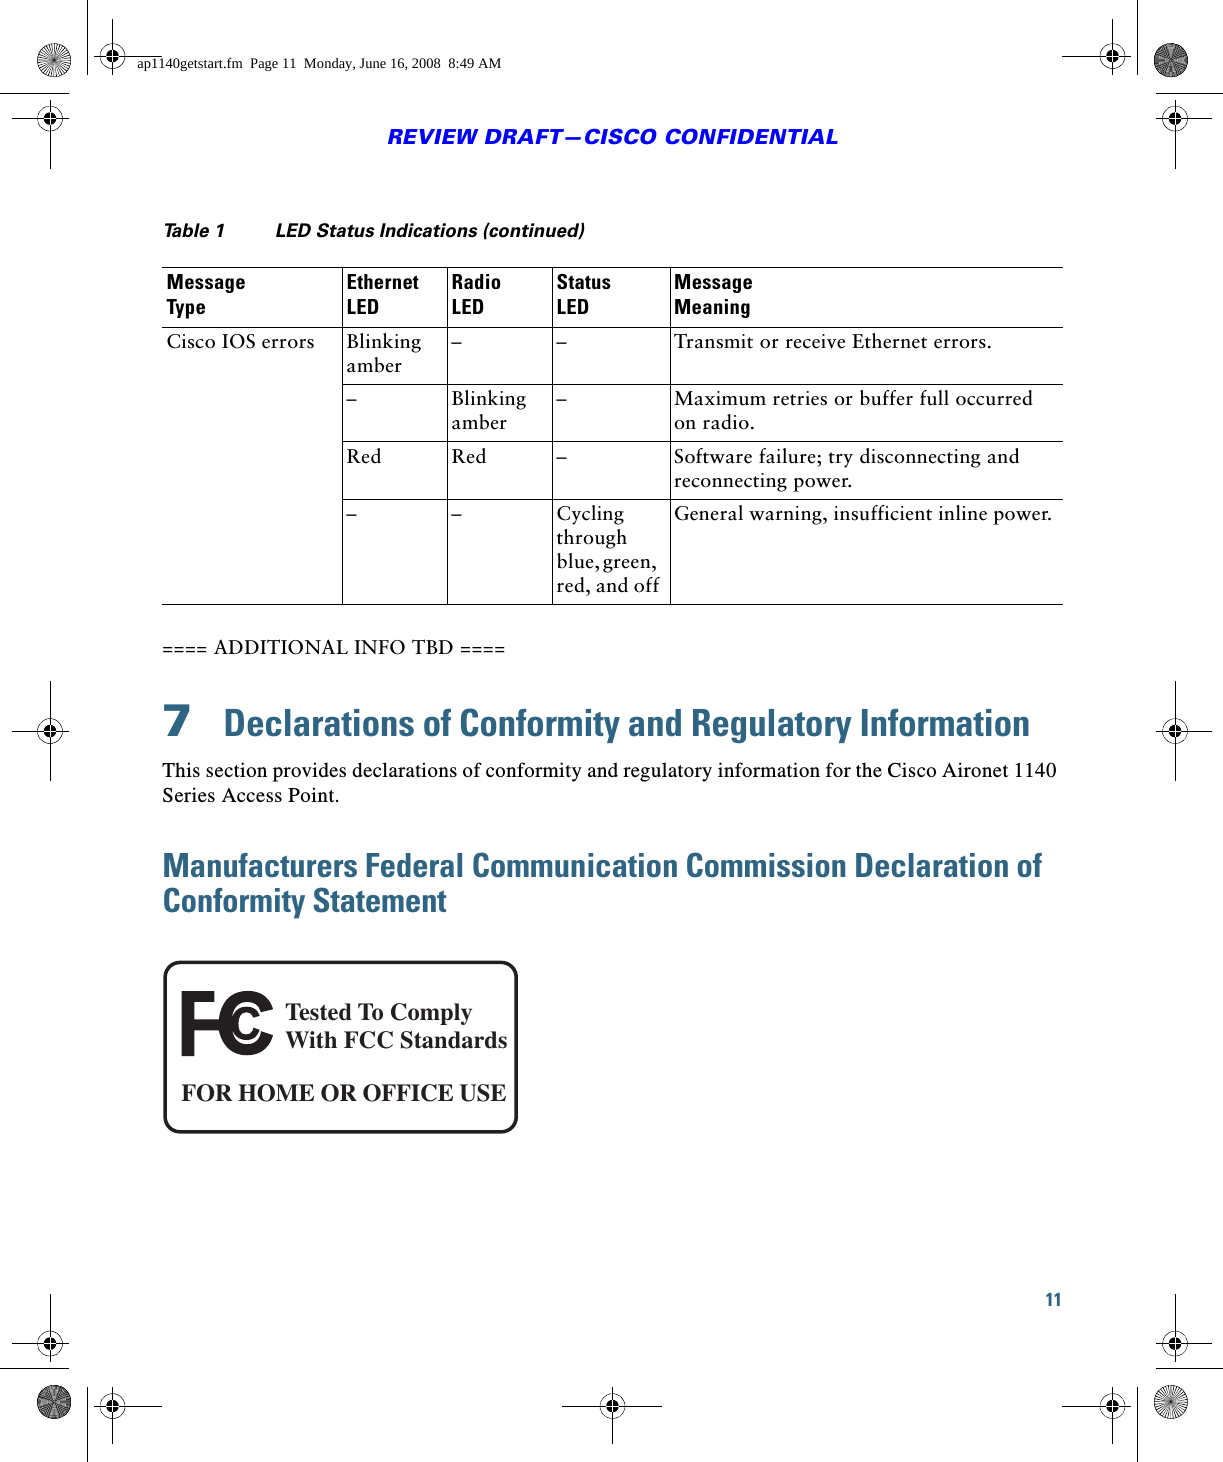 11REVIEW DRAFT—CISCO CONFIDENTIAL==== ADDITIONAL INFO TBD ====7  Declarations of Conformity and Regulatory InformationThis section provides declarations of conformity and regulatory information for the Cisco Aironet 1140 Series Access Point.Manufacturers Federal Communication Commission Declaration of Conformity StatementCisco IOS errors Blinking amber– – Transmit or receive Ethernet errors.–Blinking amber–Maximum retries or buffer full occurred on radio.Red Red –Software failure; try disconnecting and reconnecting power.– – Cycling through blue, green, red, and offGeneral warning, insufficient inline power.Table 1 LED Status Indications (continued)Message  TypeEthernet LEDRadio  LEDStatus  LEDMessageMeaningTested To ComplyWith FCC StandardsFOR HOME OR OFFICE USEap1140getstart.fm  Page 11  Monday, June 16, 2008  8:49 AM